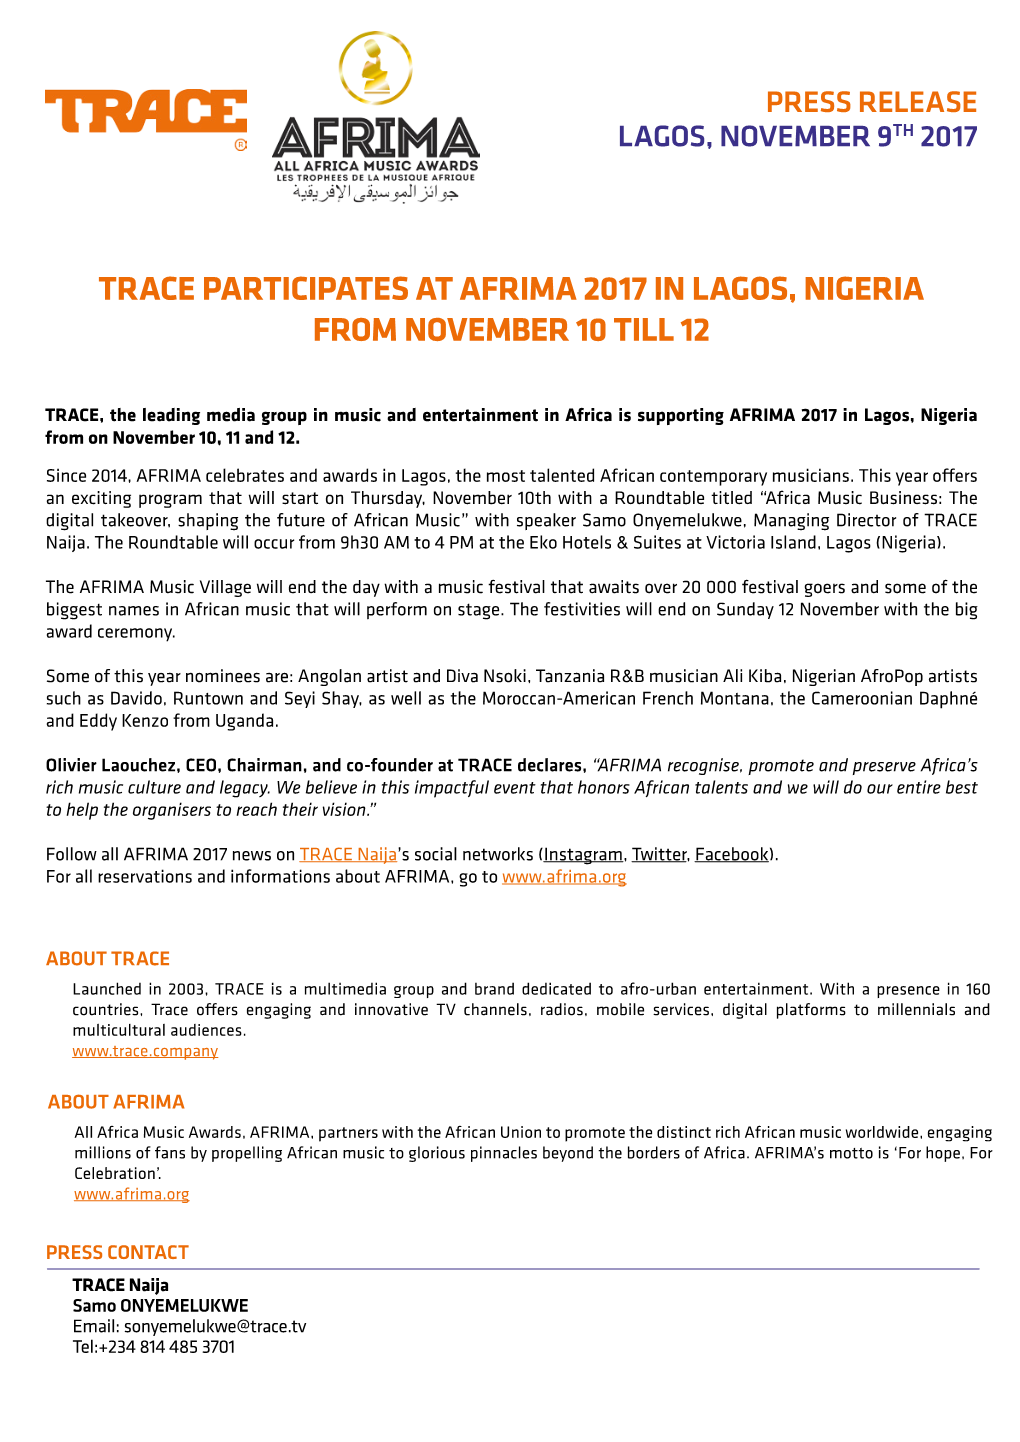 Trace Participates at Afrima 2017 in Lagos, Nigeria from November 10 Till 12